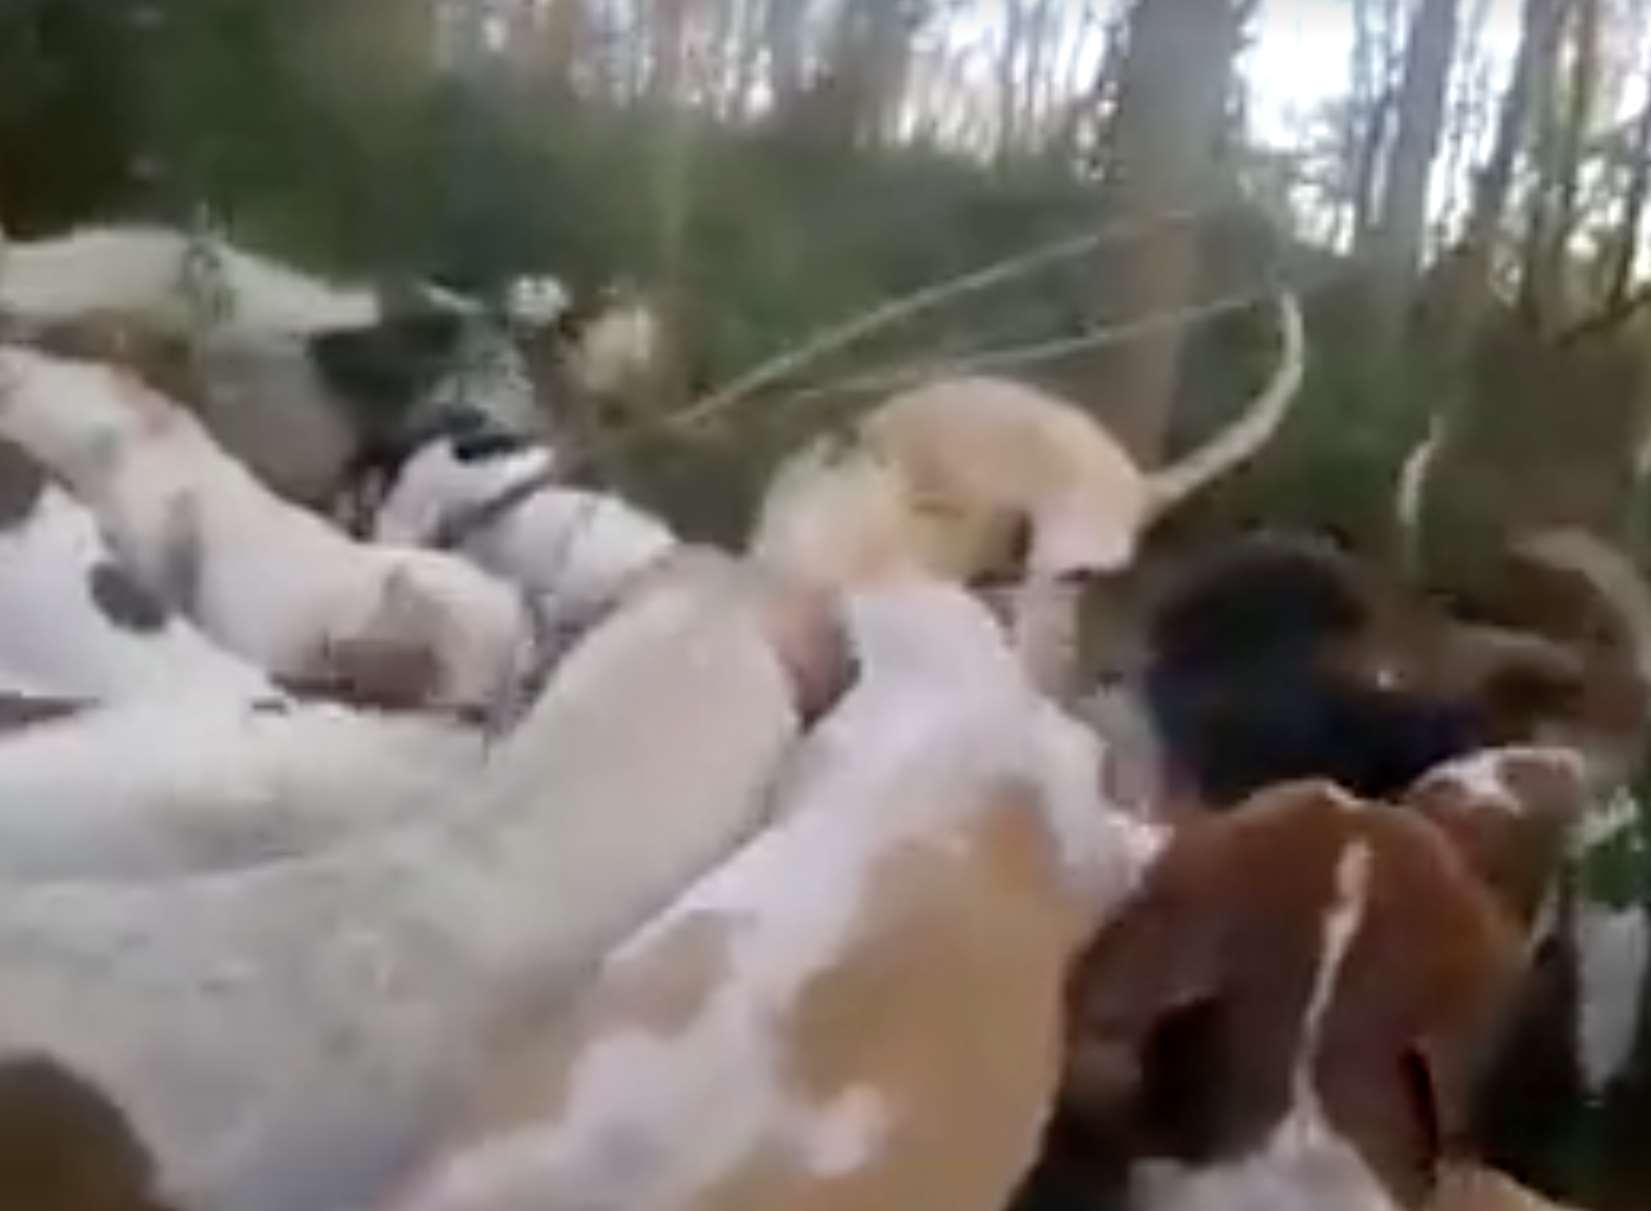 The graphic video taken by the saboteur group appears to show hounds ripping a fox apart